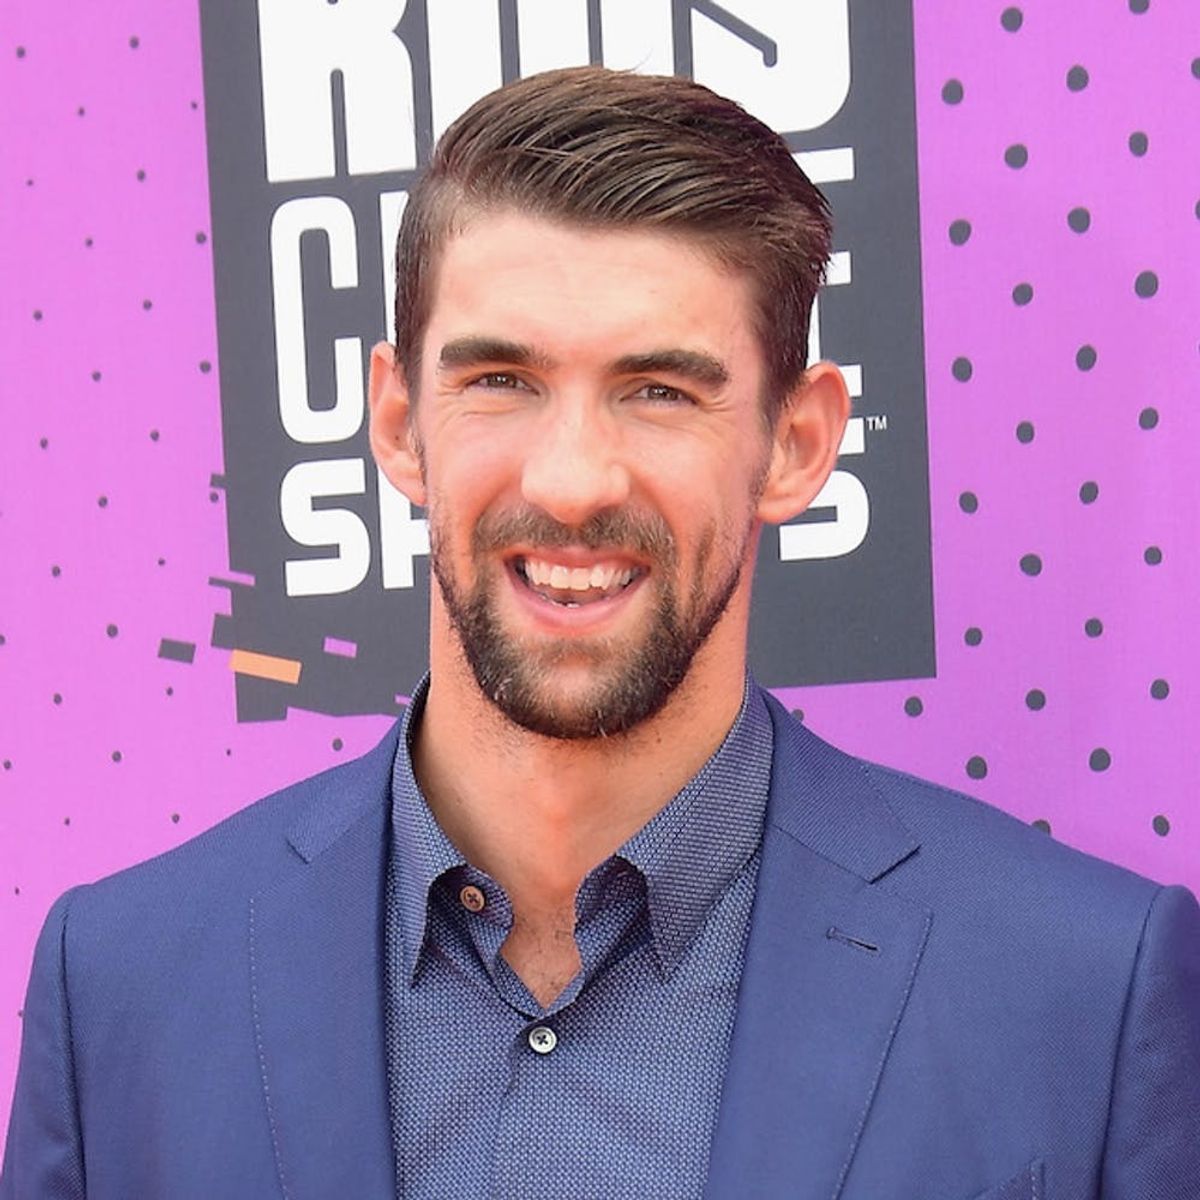 Morning Buzz! Michael Phelps Raced a Fake Shark for Shark Week and Fans Are Devastated + More